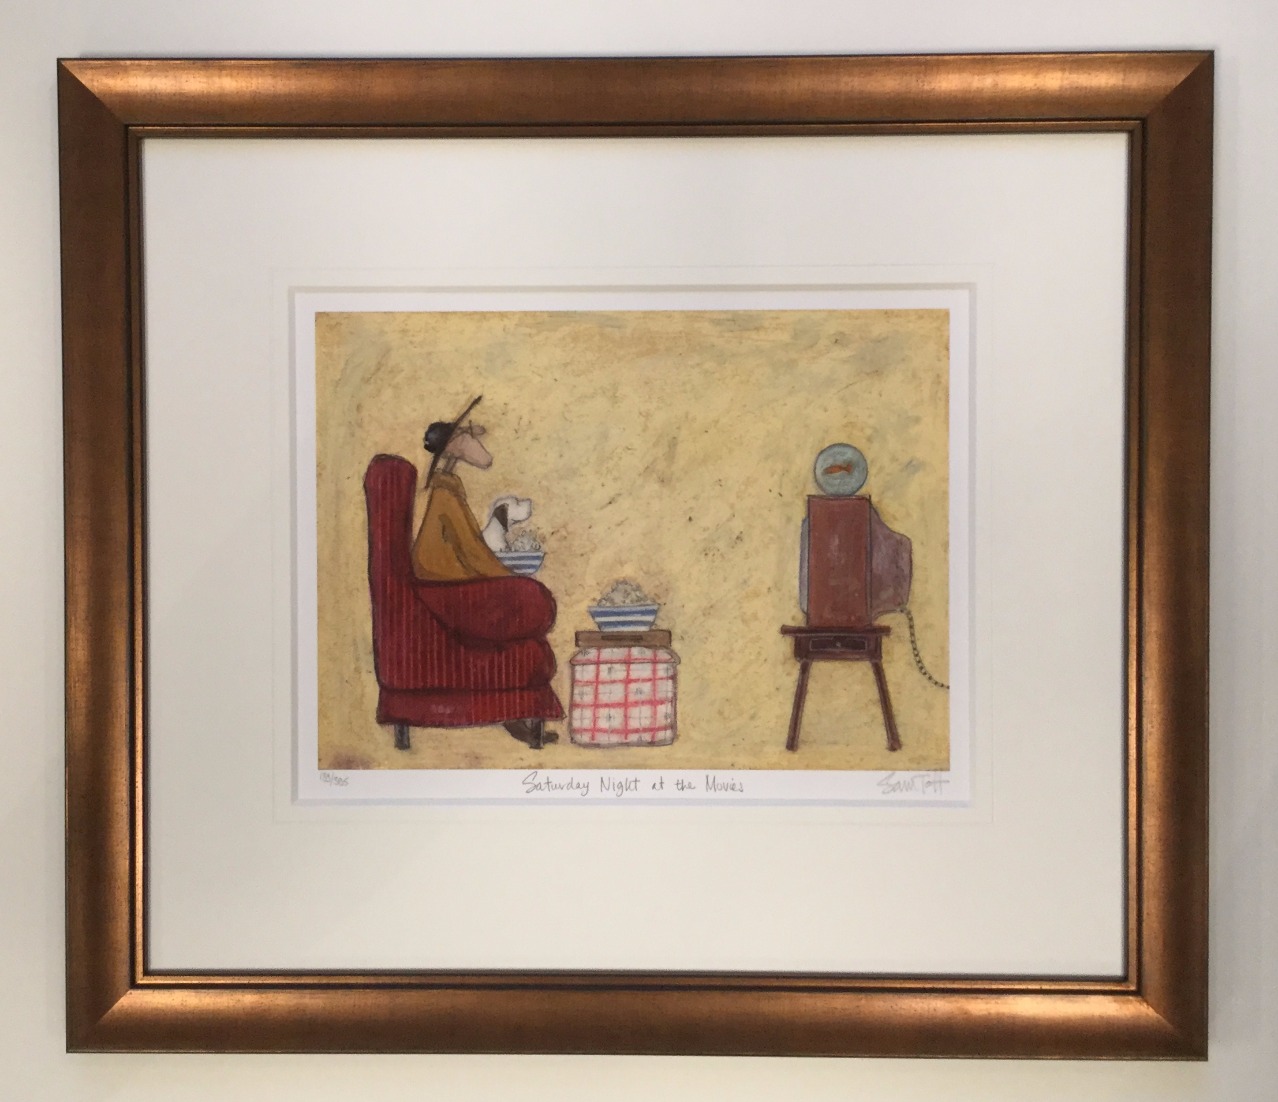 Saturday Night at the Movies by Sam Toft